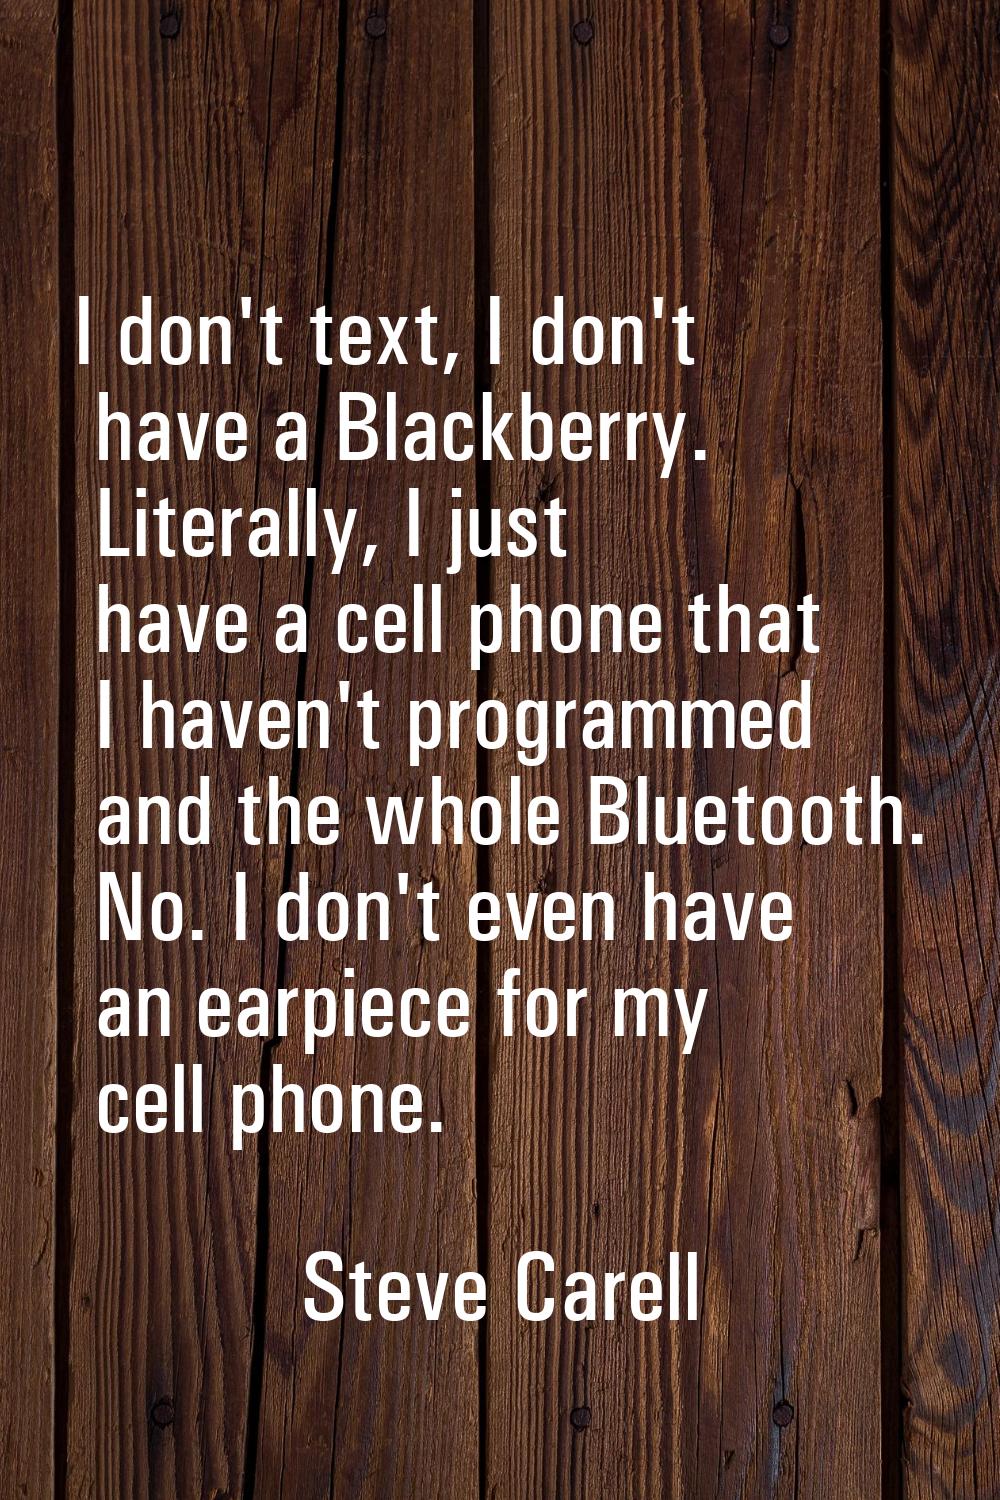 I don't text, I don't have a Blackberry. Literally, I just have a cell phone that I haven't program